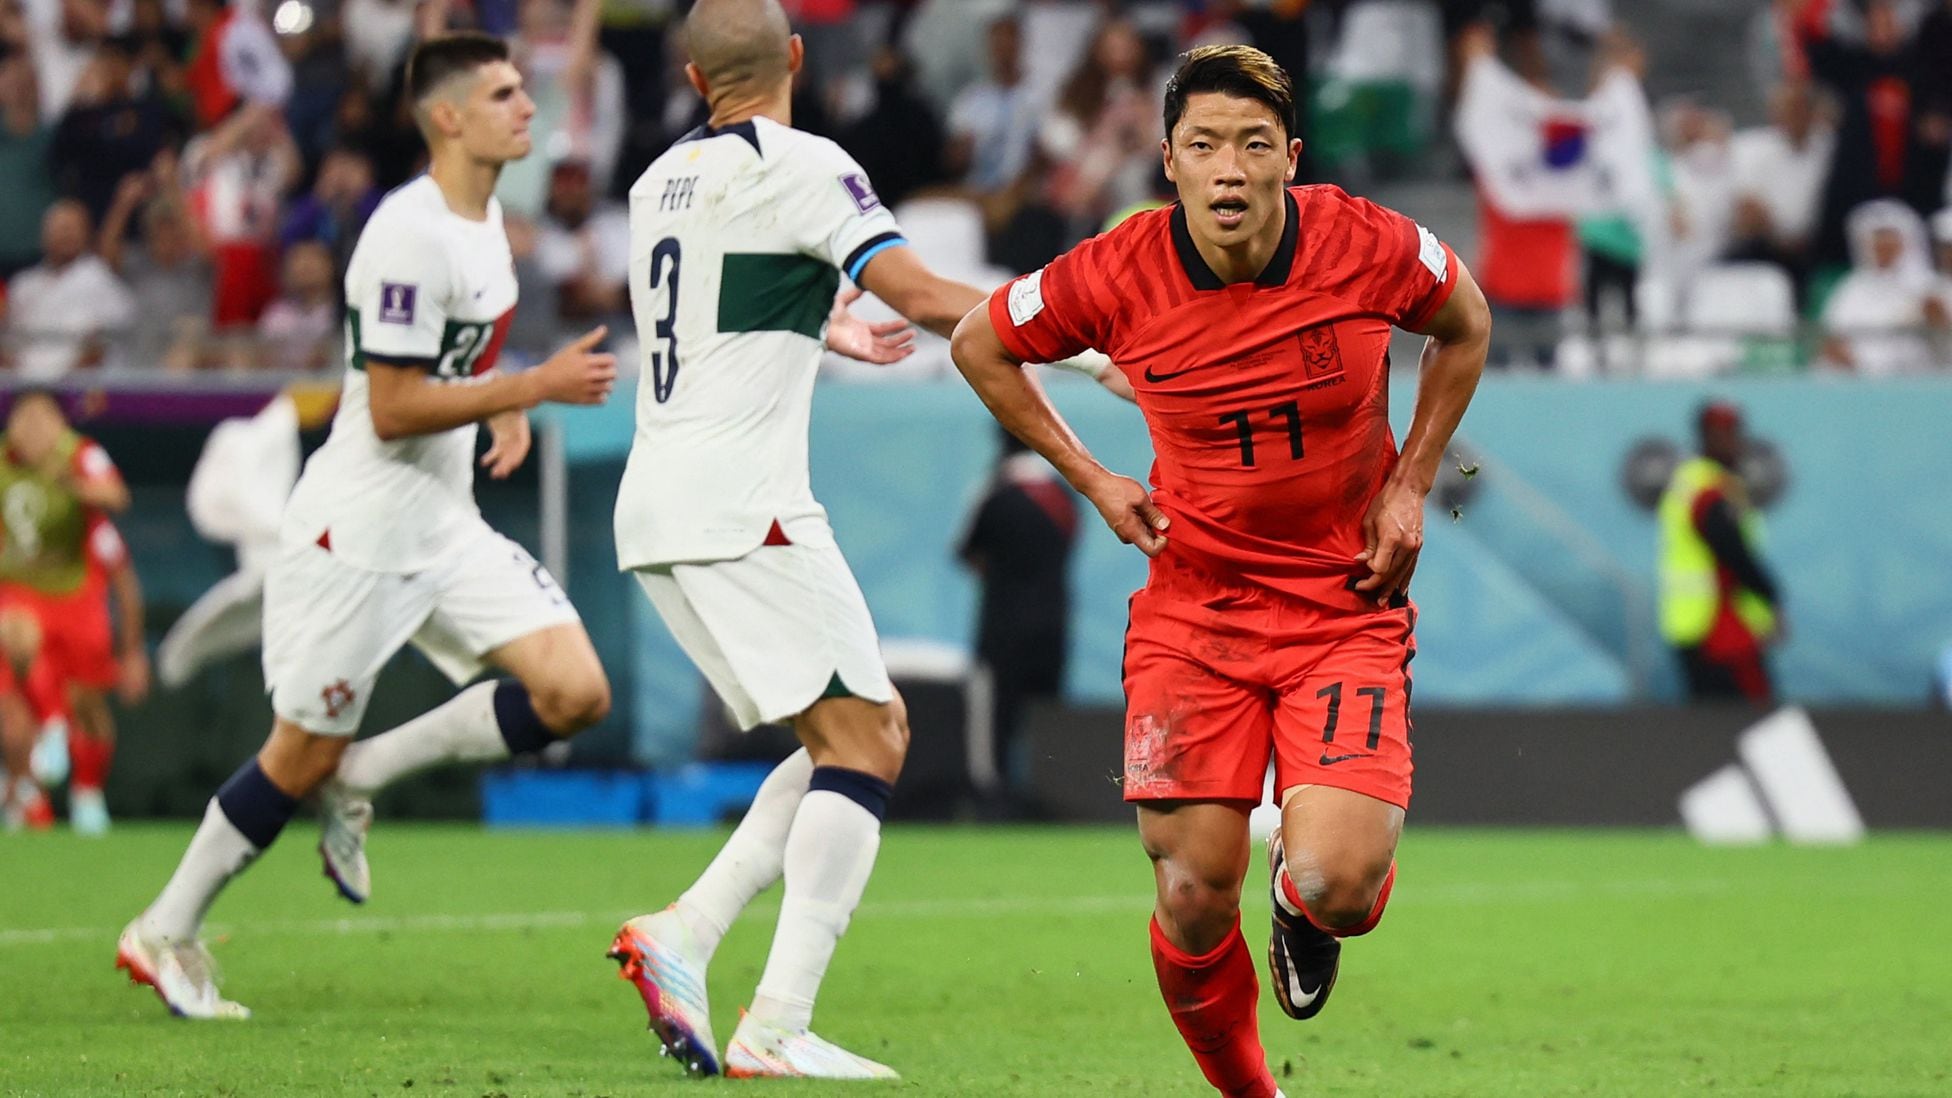 South Korea vs Portugal summary: Korea into last 16 after late Hwang goal,  score, goals, highlights 2-1 | World Cup 2022 - AS USA